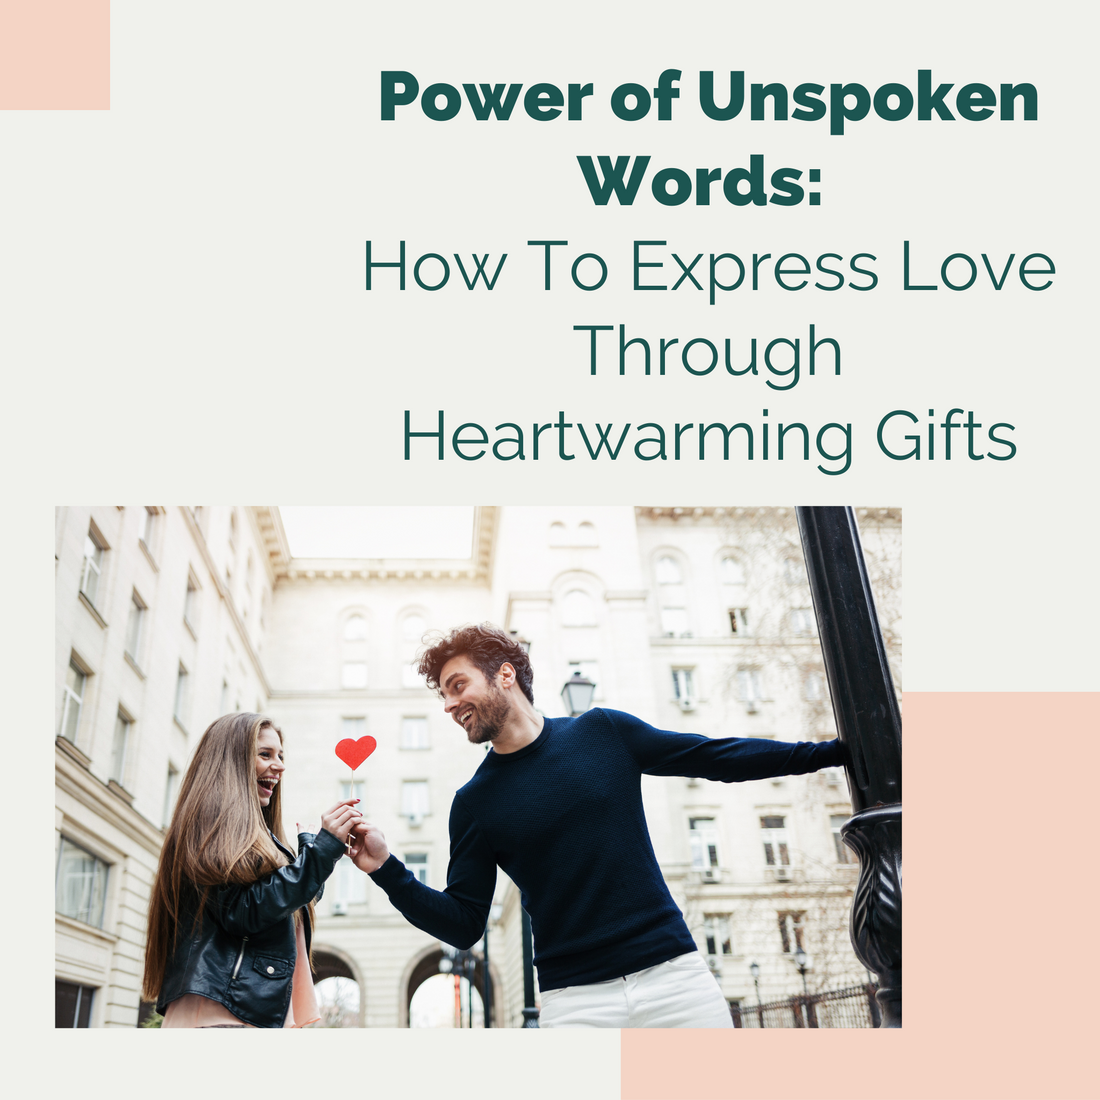 Power of Unspoken Words:  How To Express Love Through Heartwarming Gifts